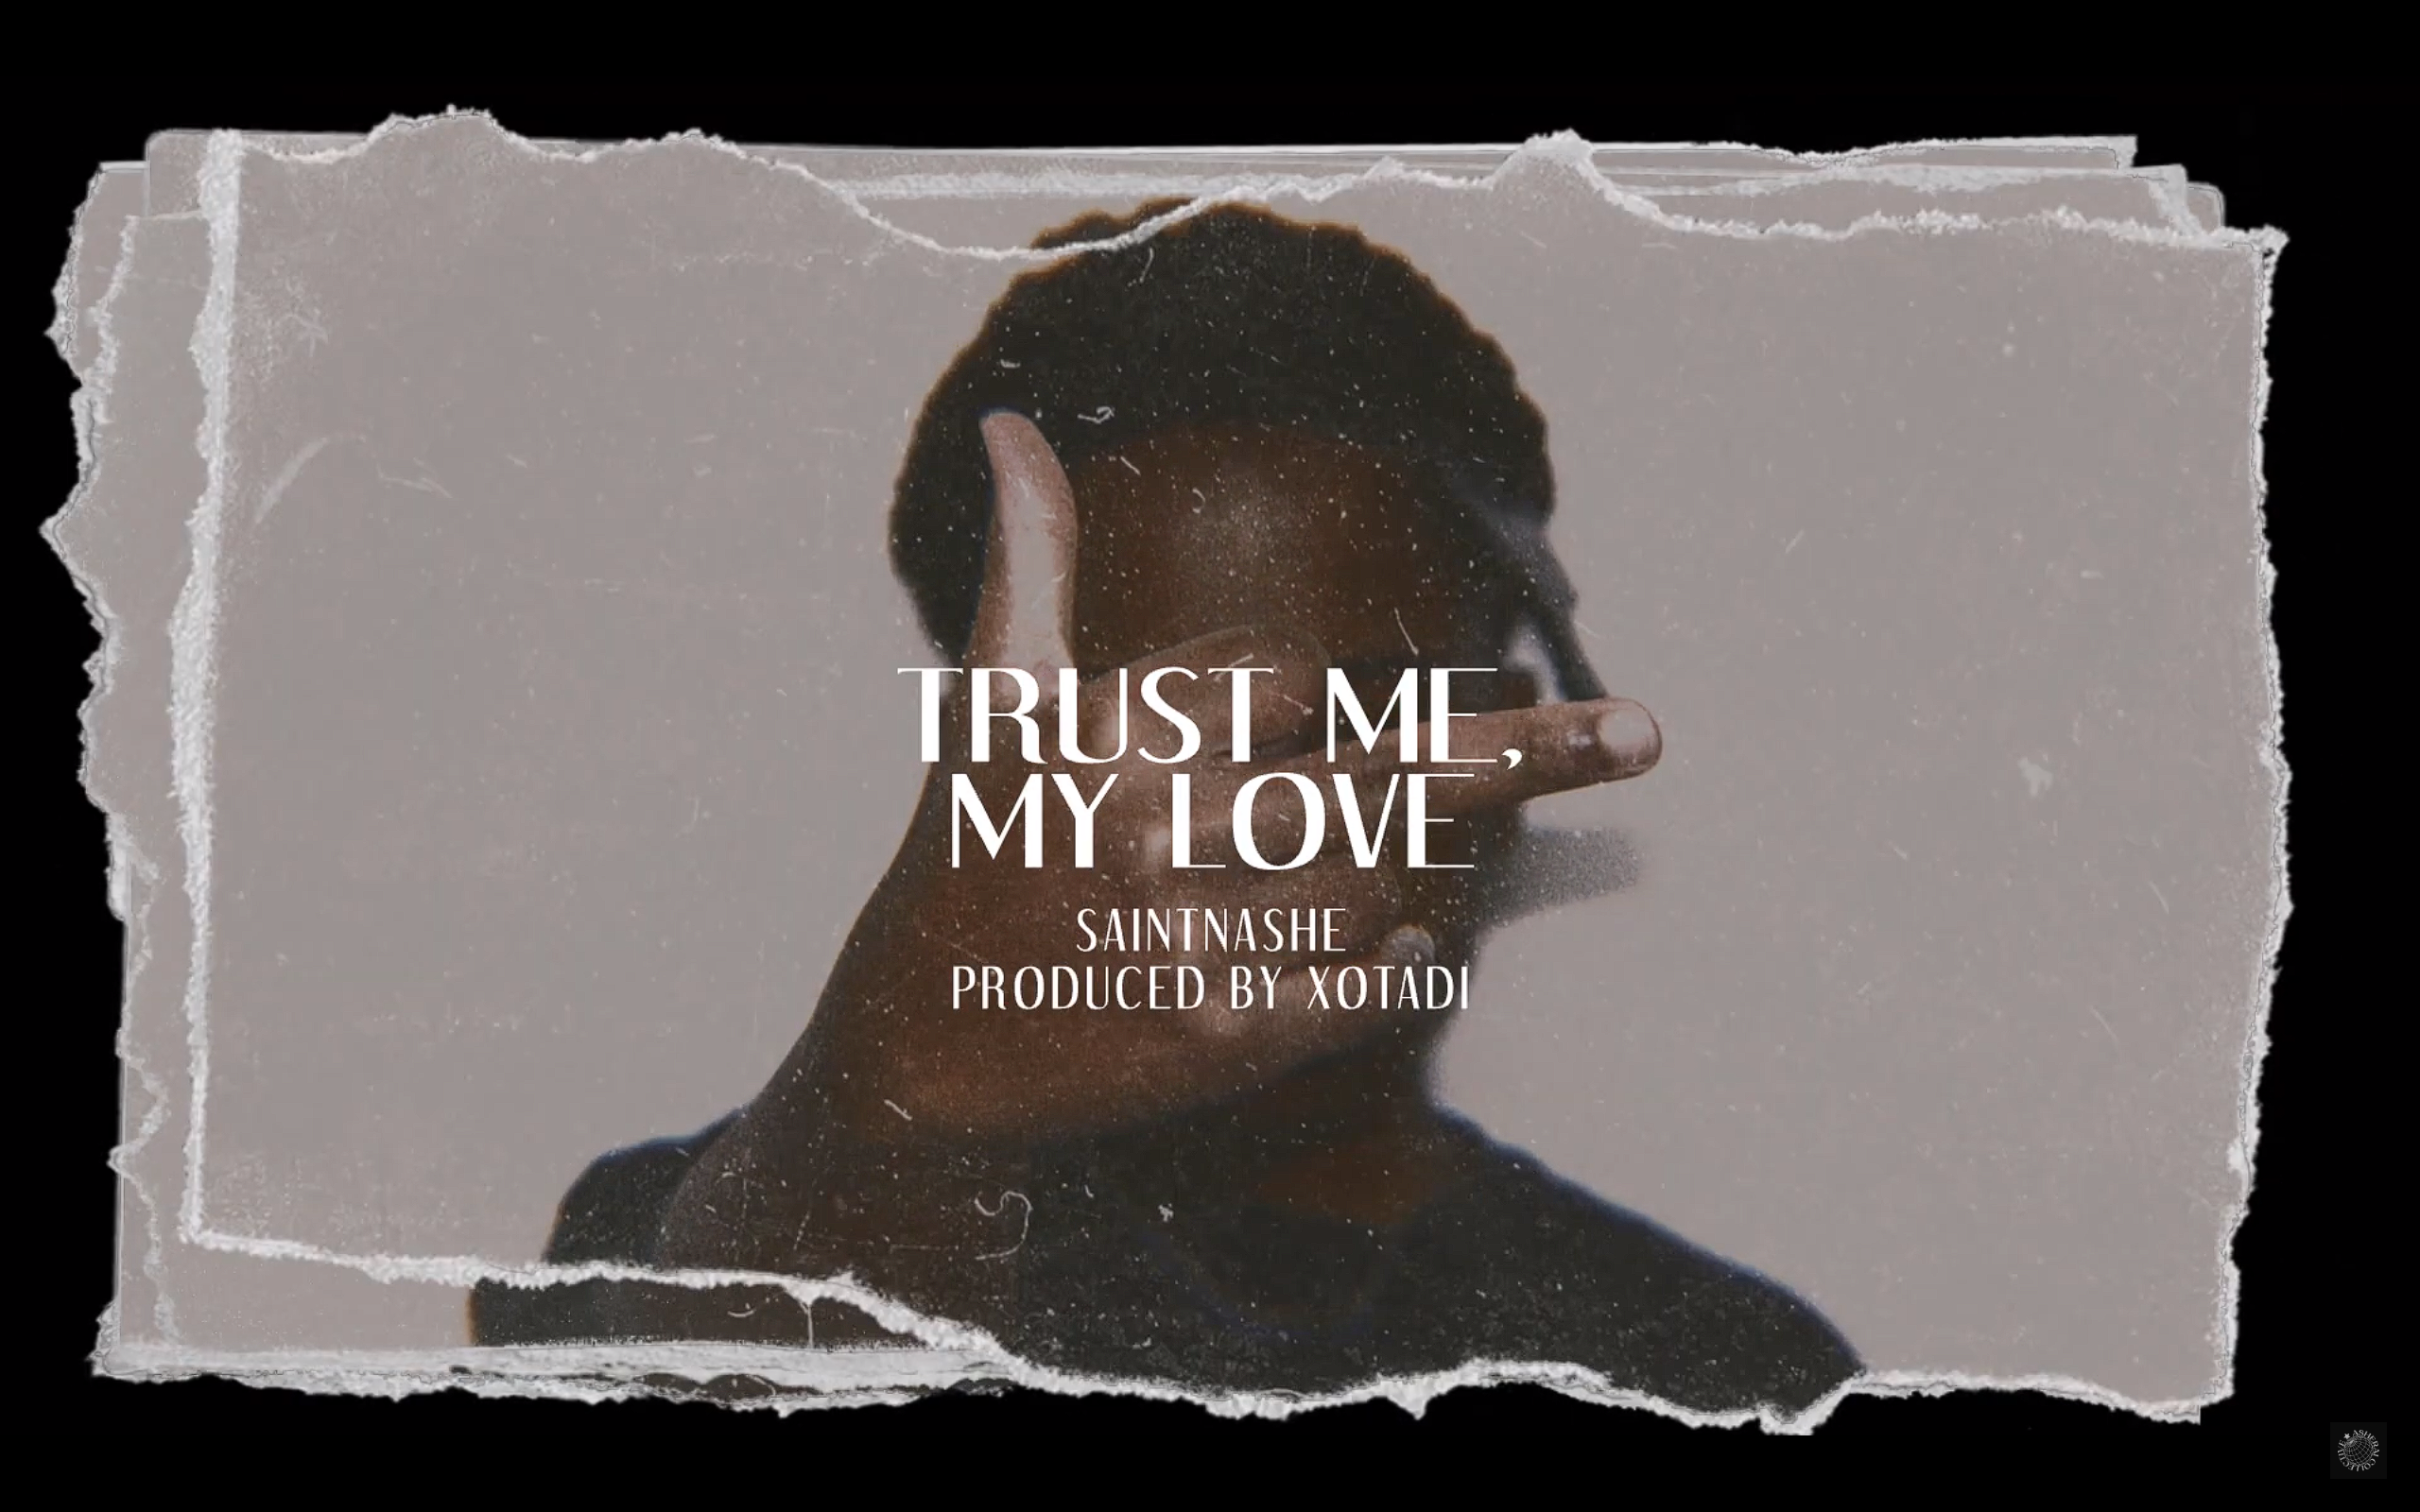 Load video: The lyric video to the song &quot;Trust Me, My Love&quot; by saintnashe.